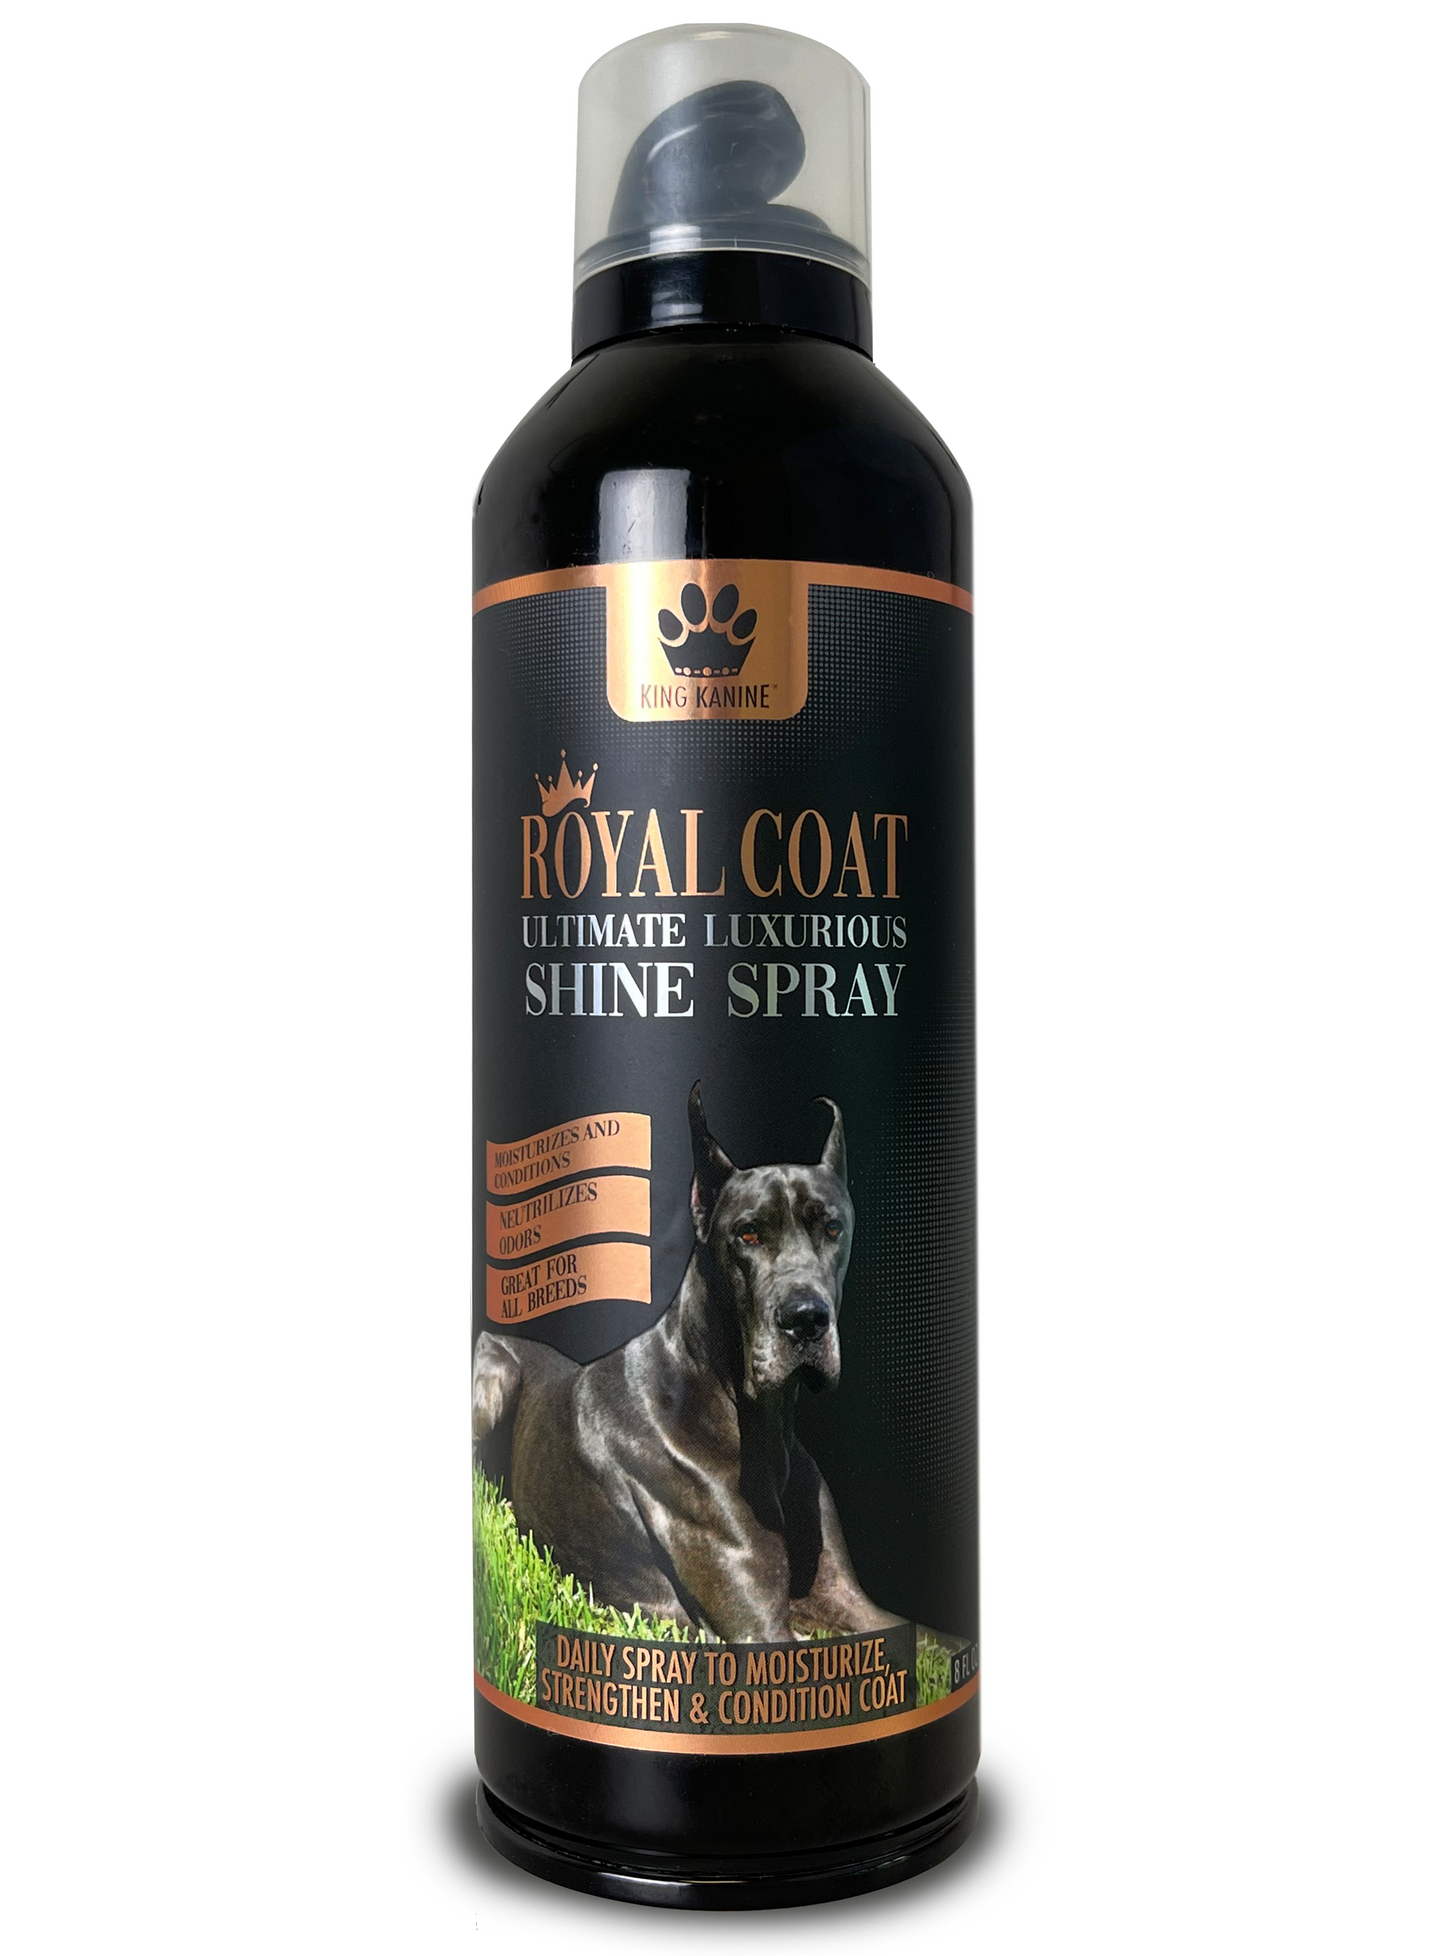 NEW!!! Royal Coat Ultimate Luxurious SHINE SPRAY - dogs only